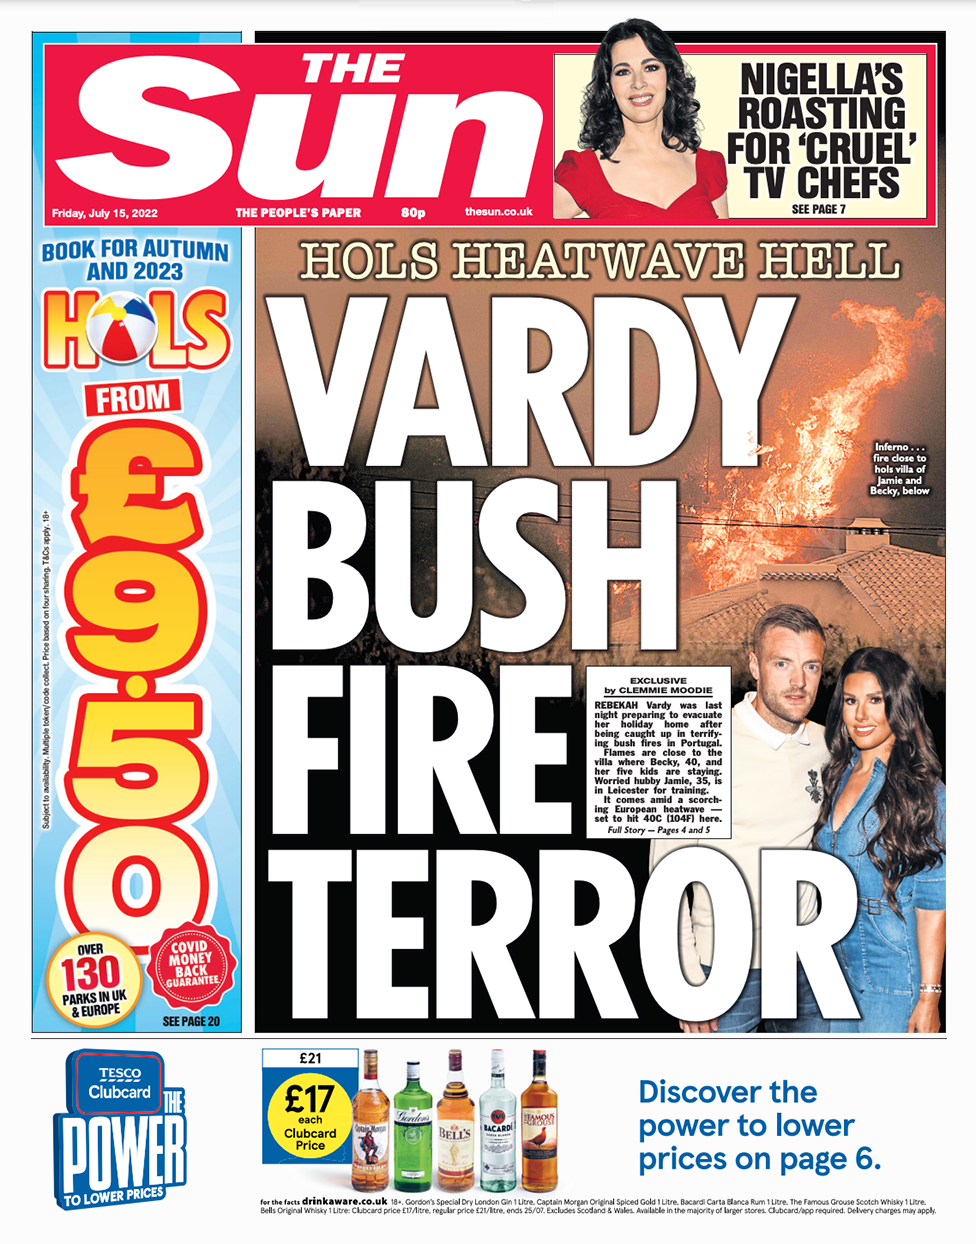 The Sun's front page, featuring the headline "Vardy bush fire terror"